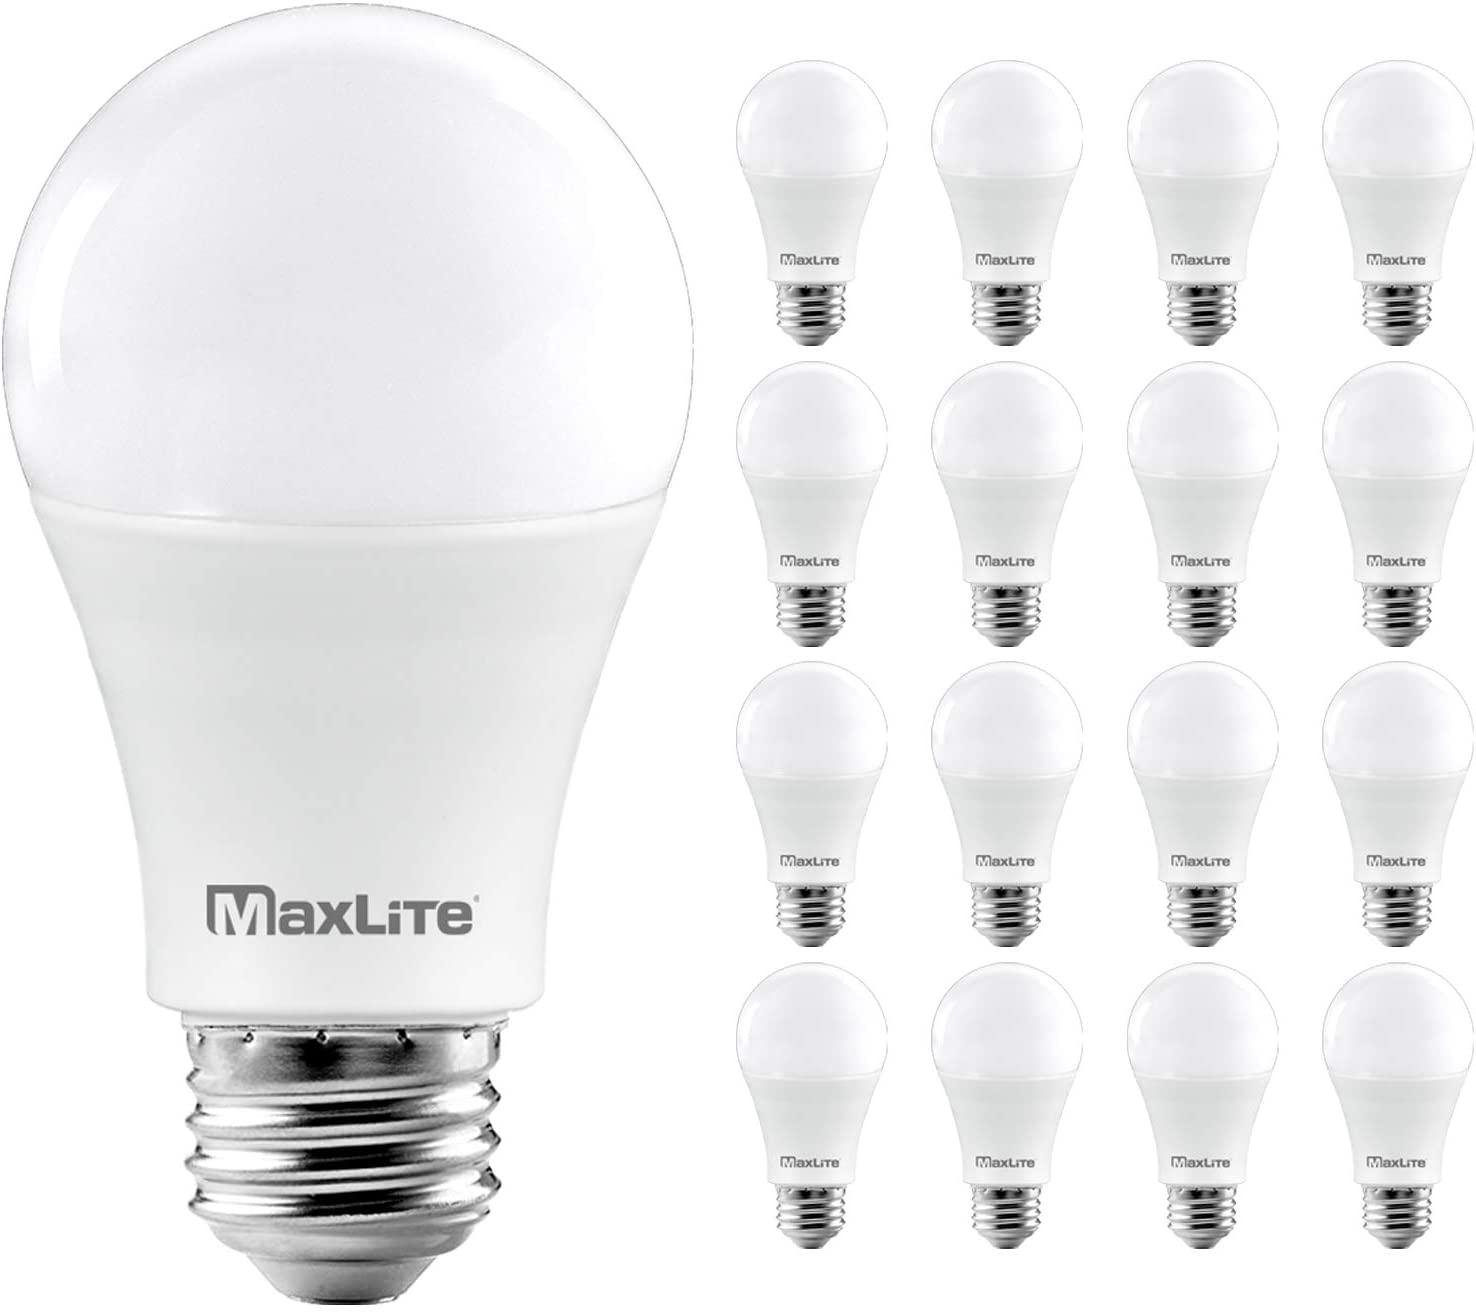 16 MaxLite 5000K A19 1600 Lumen 100W Dimmable LED Bulbs for $24.93 Shipped